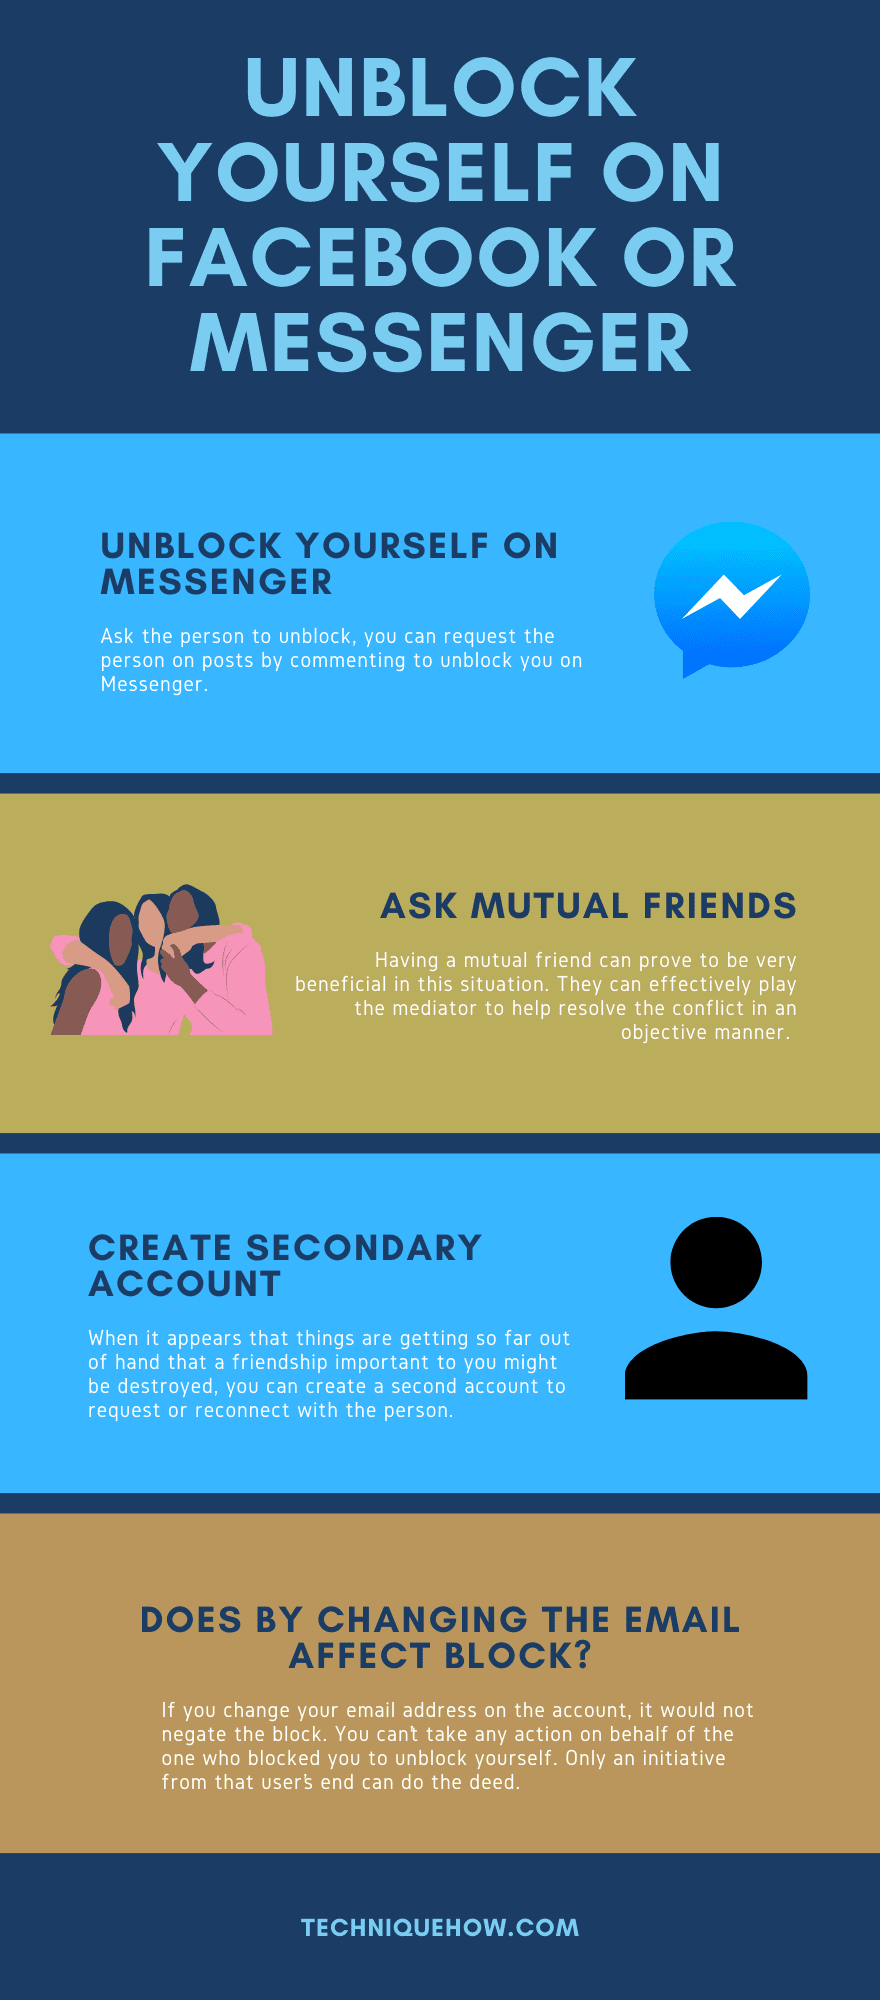 infographic_Unblock Yourself on Facebook or Messenger